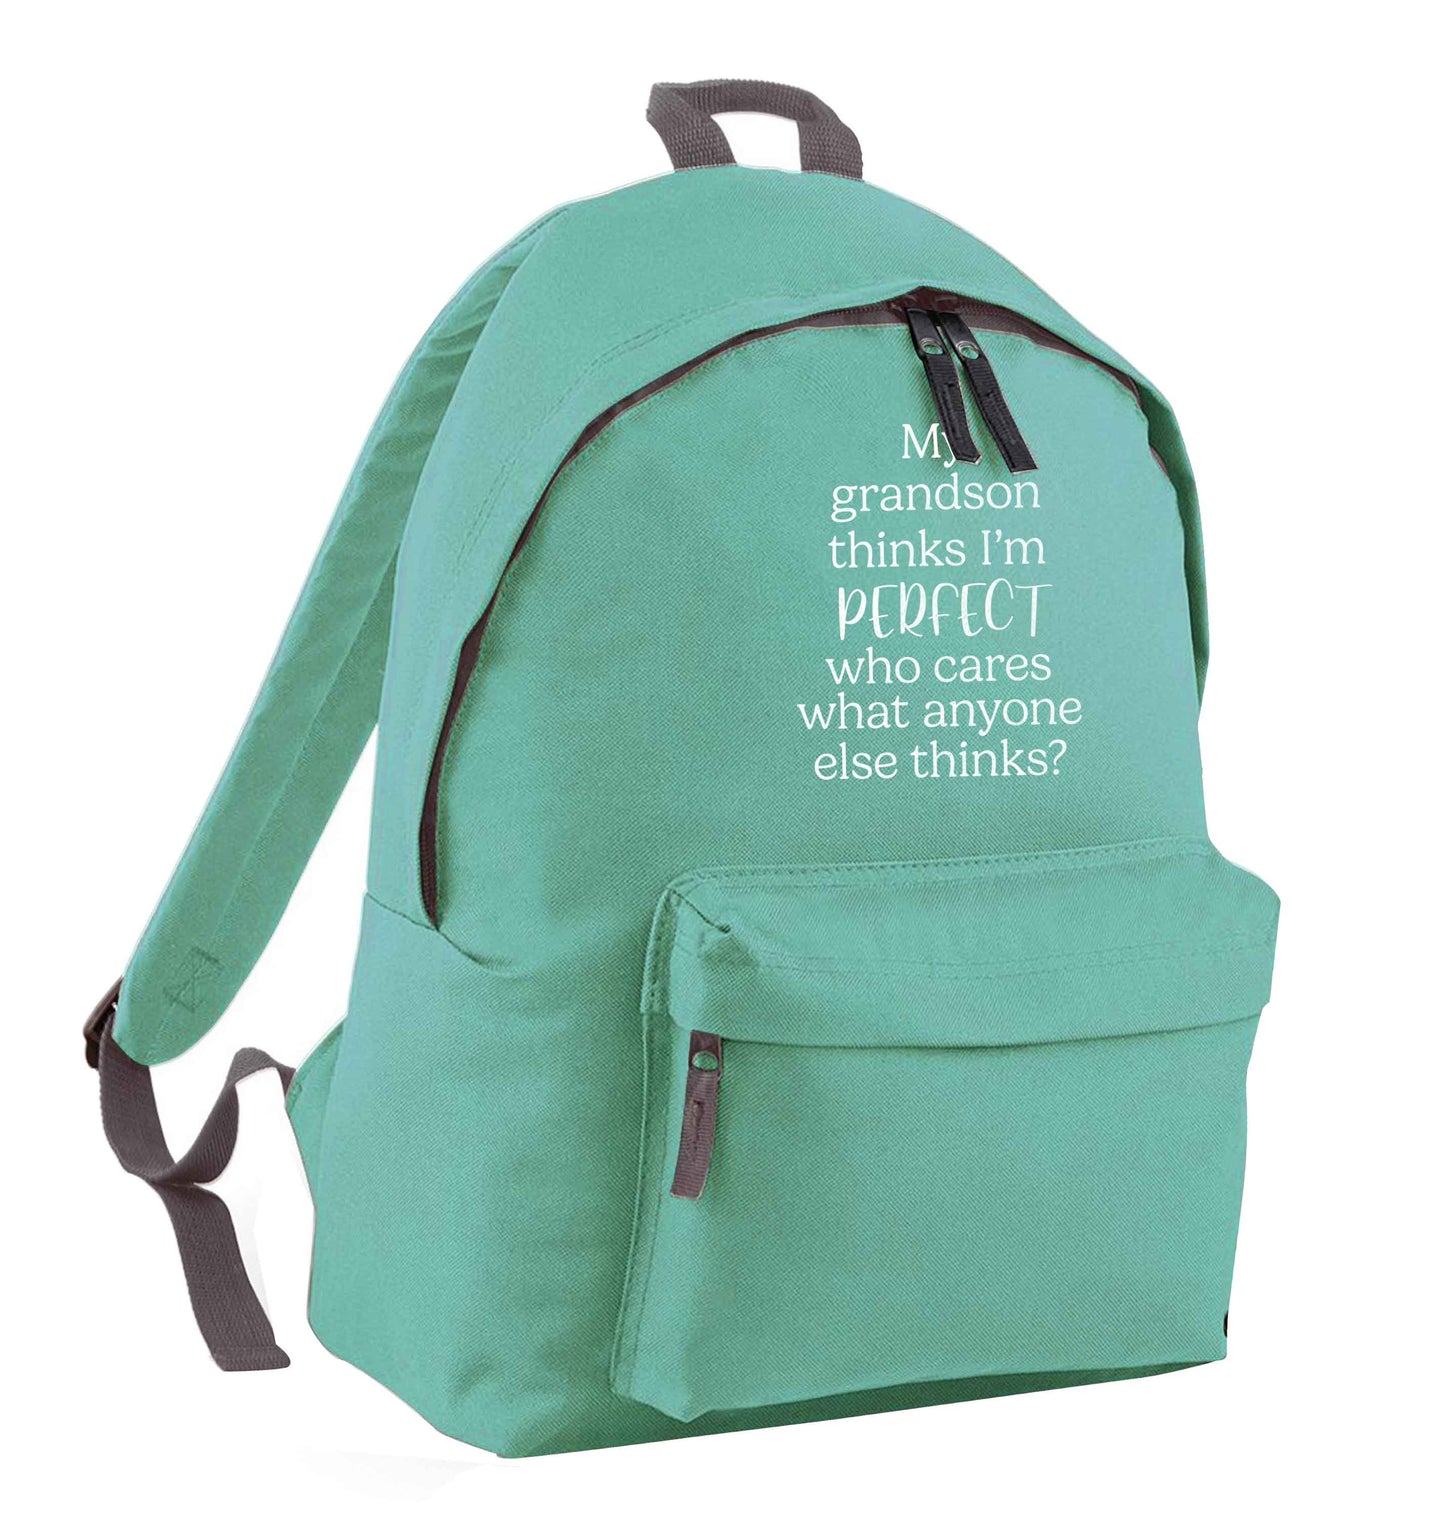 My grandson thinks I'm perfect mint adults backpack